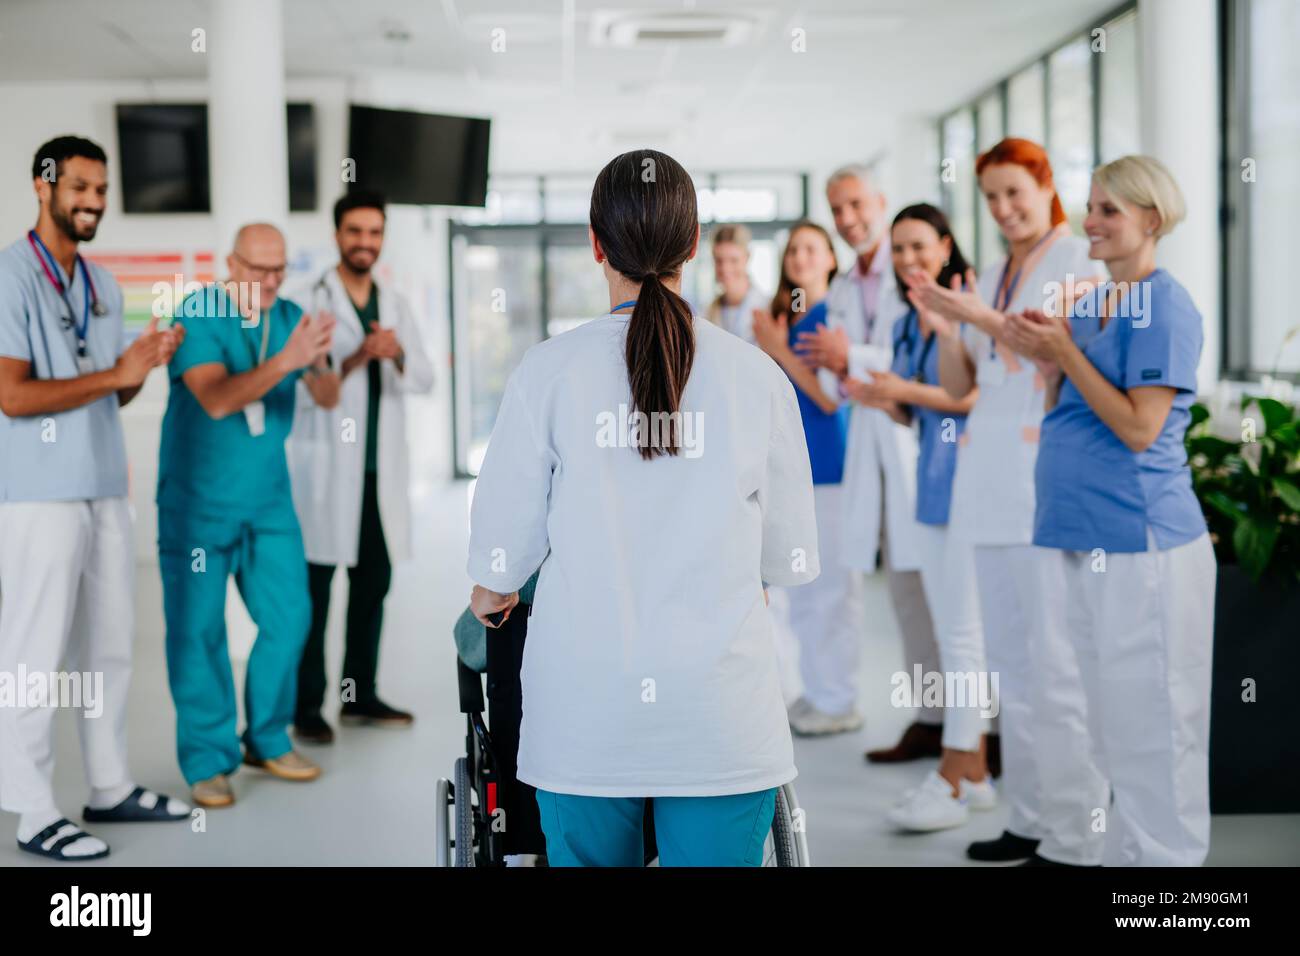 Medical staff clapping to senior patient who recovered from serious illness. Stock Photo